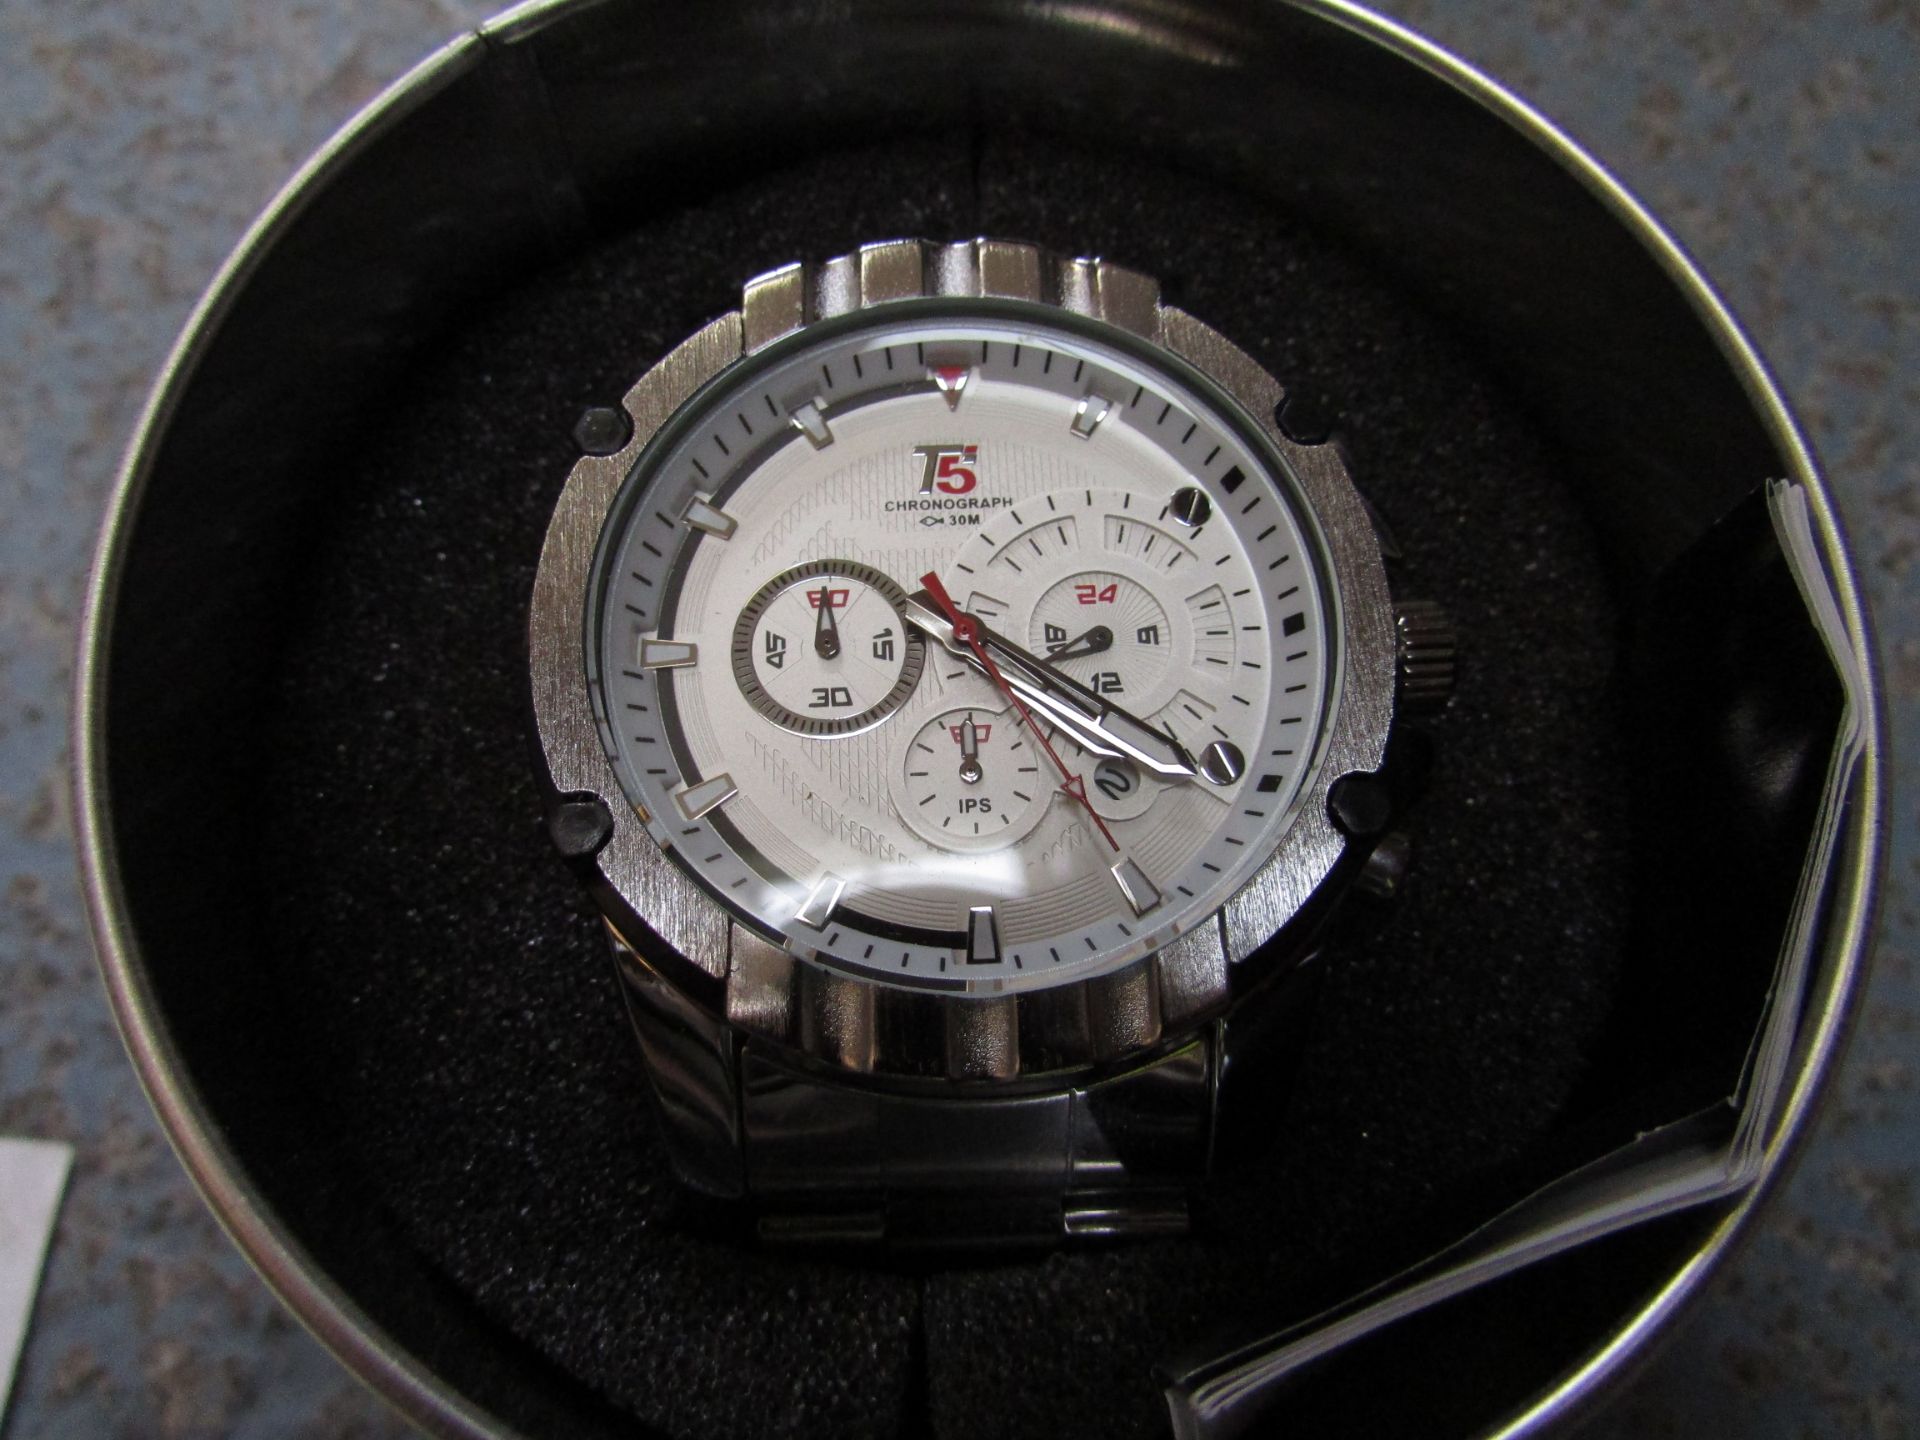 T5 Dexter D4 watch has a silver chronograph dial with silver hands and white markers. Date Function. - Image 2 of 2